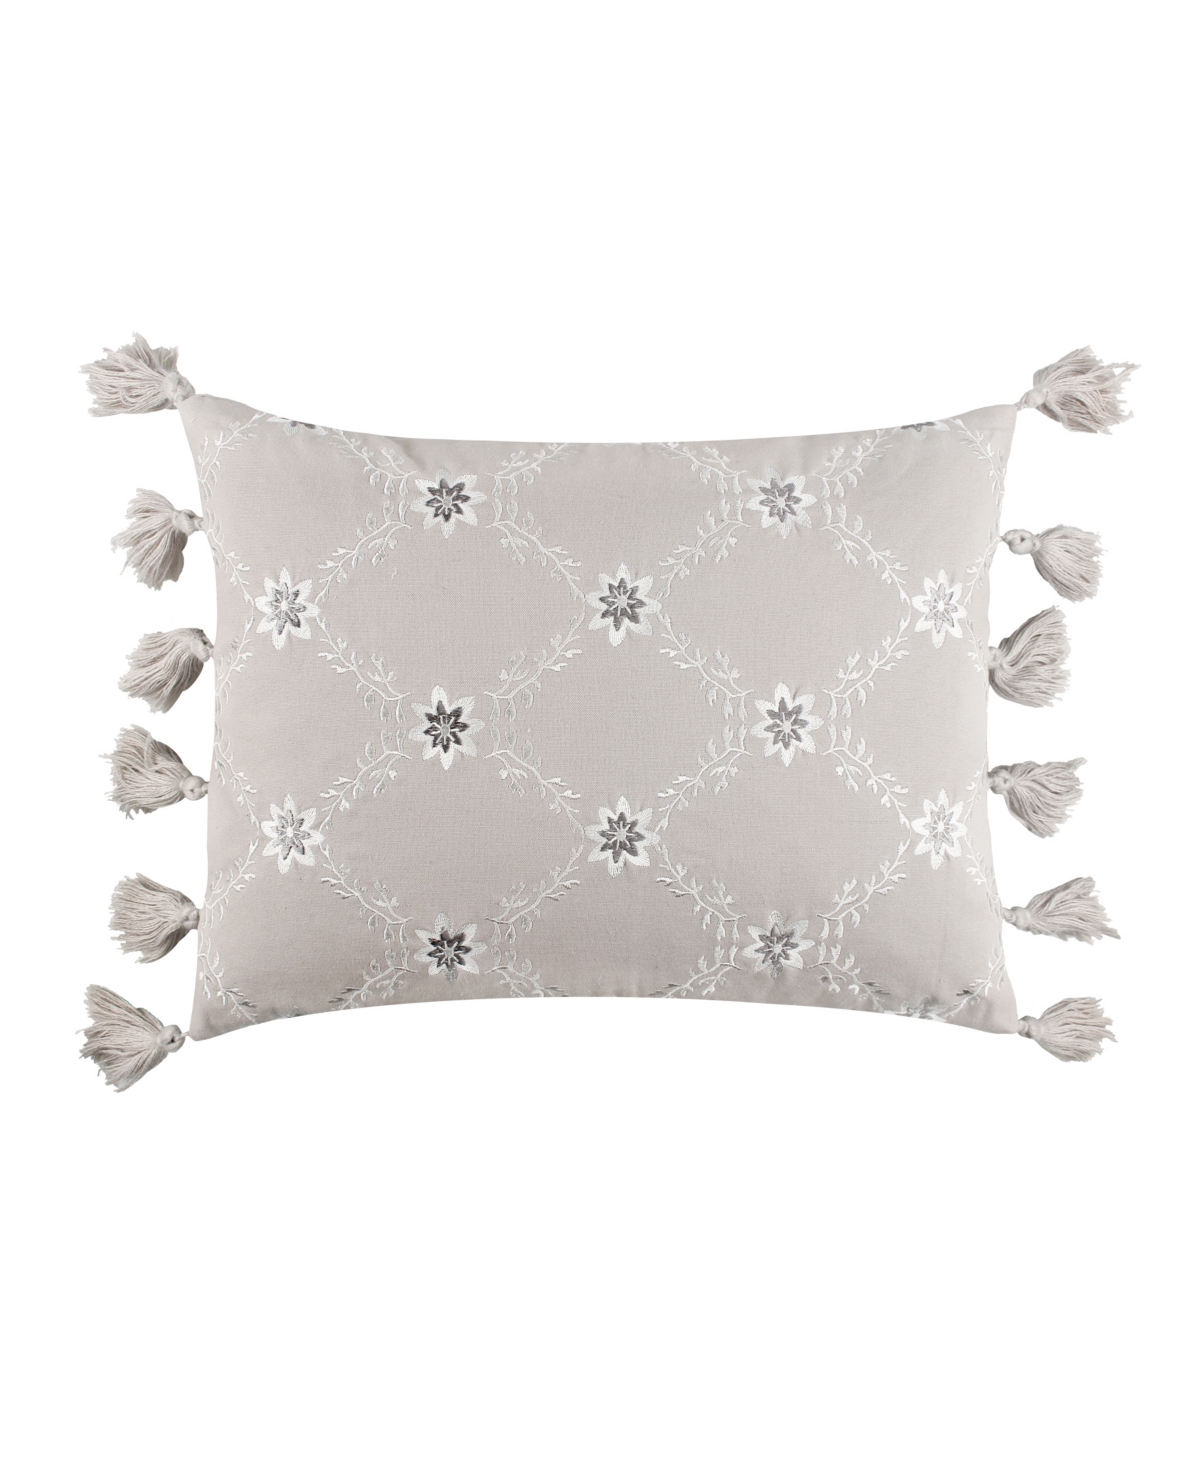 Levtex St. Ives Embroidered Decorative Pillow, 18" X 14" In Gray